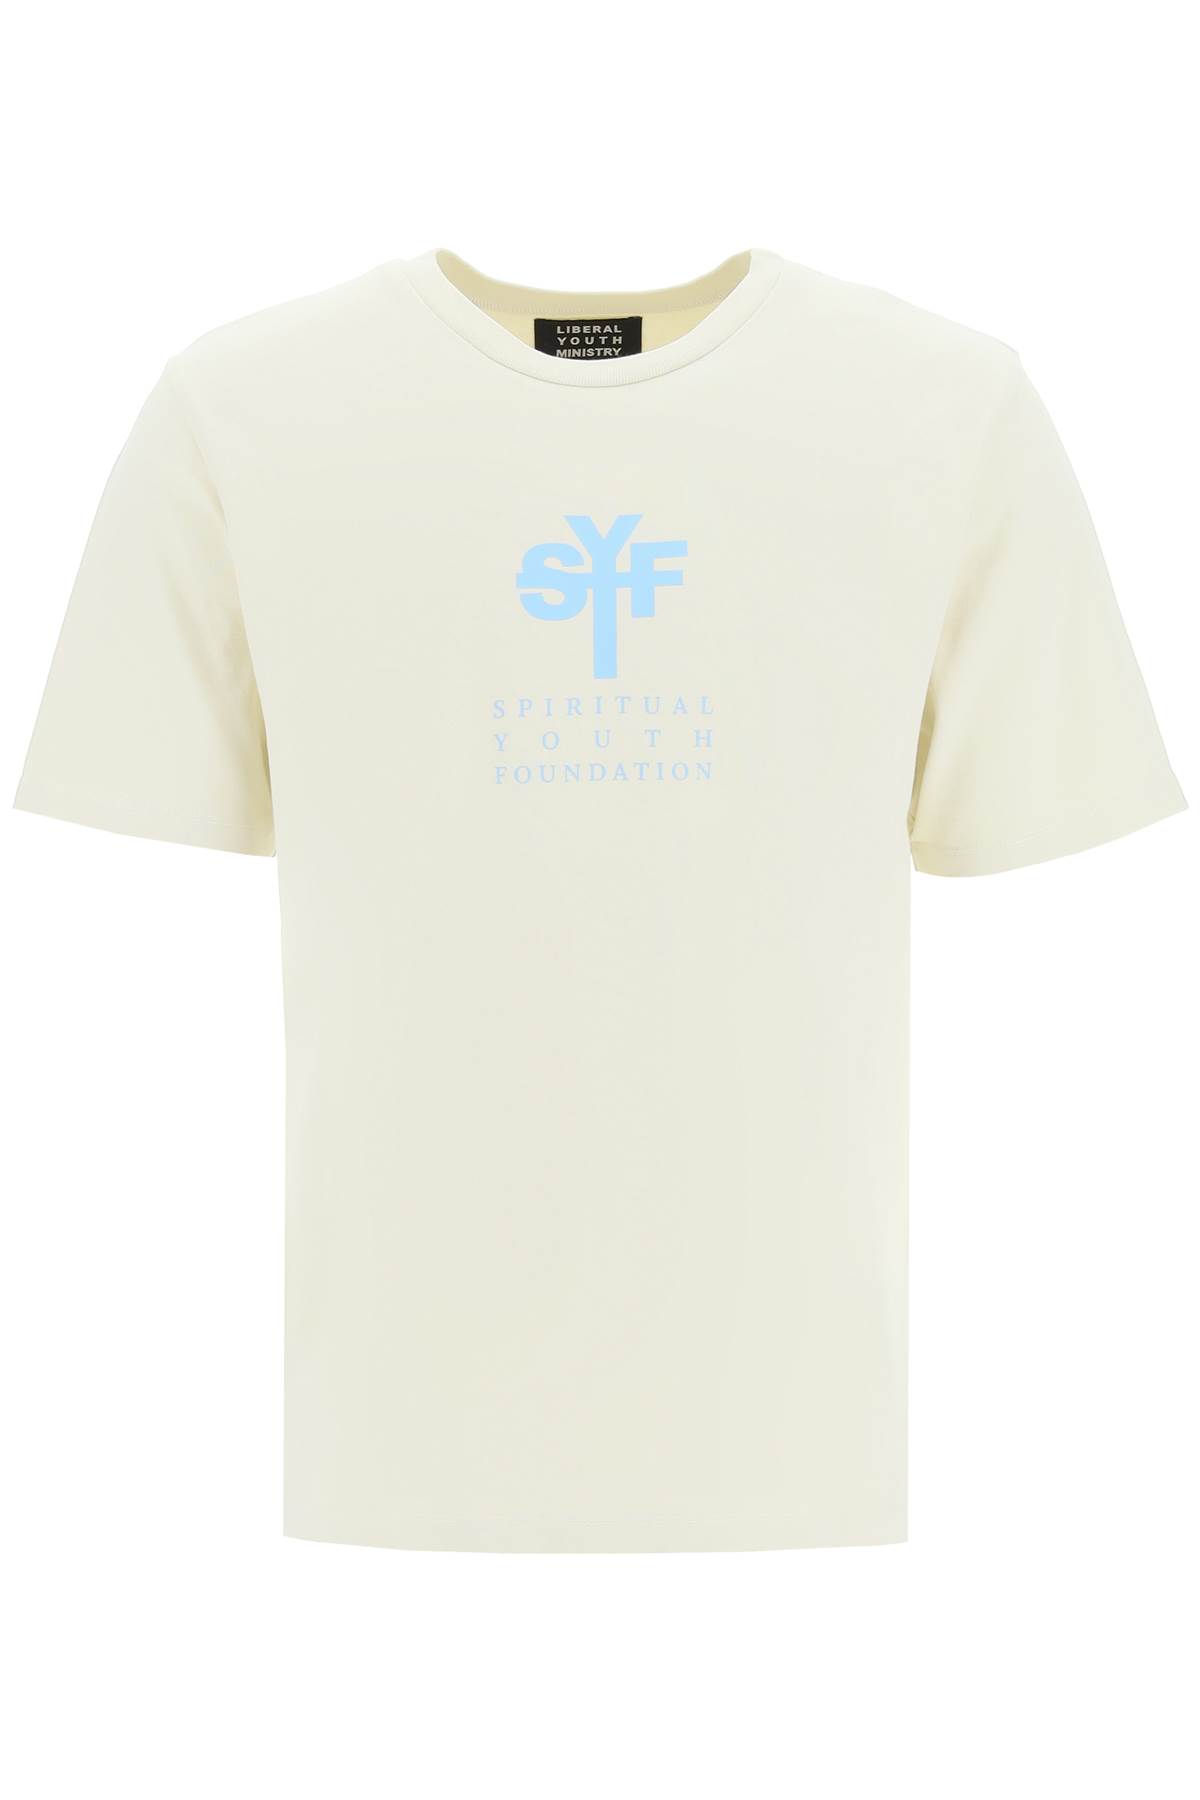 Liberal Youth Ministry Spiritual Youth Foundation T-shirt